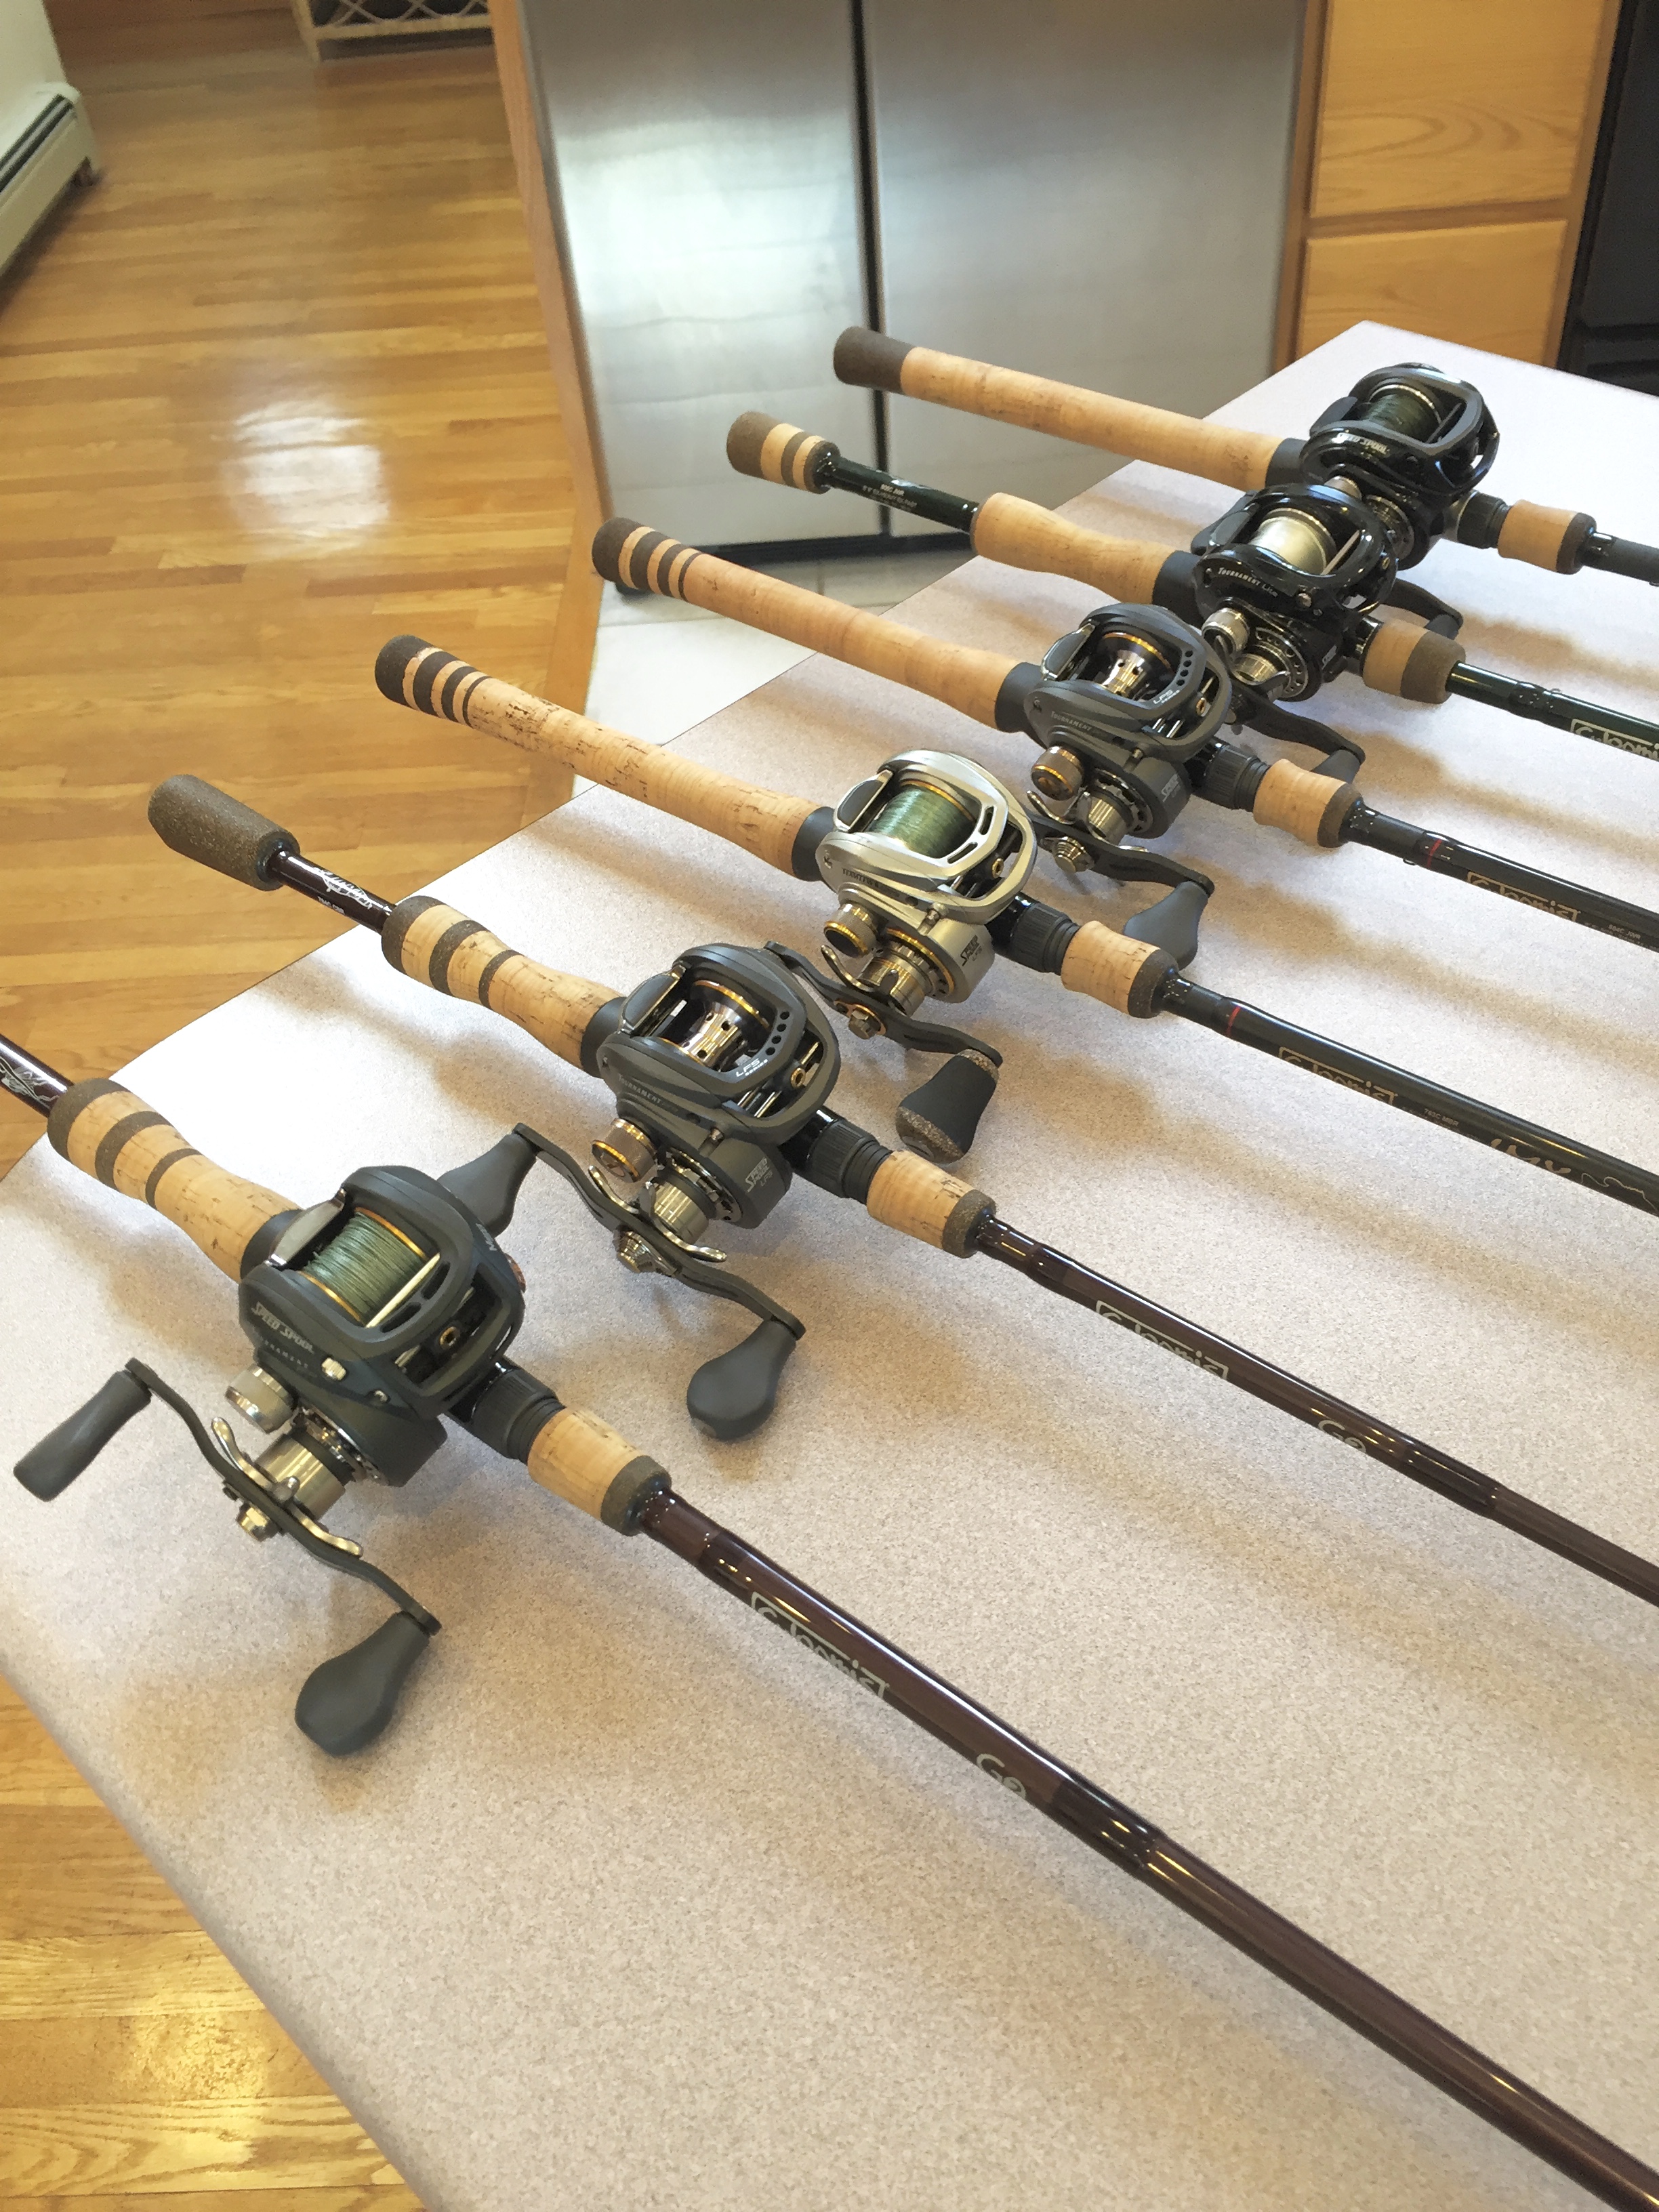 Cleaning EVA rod grips - Fishing Rods, Reels, Line, and Knots